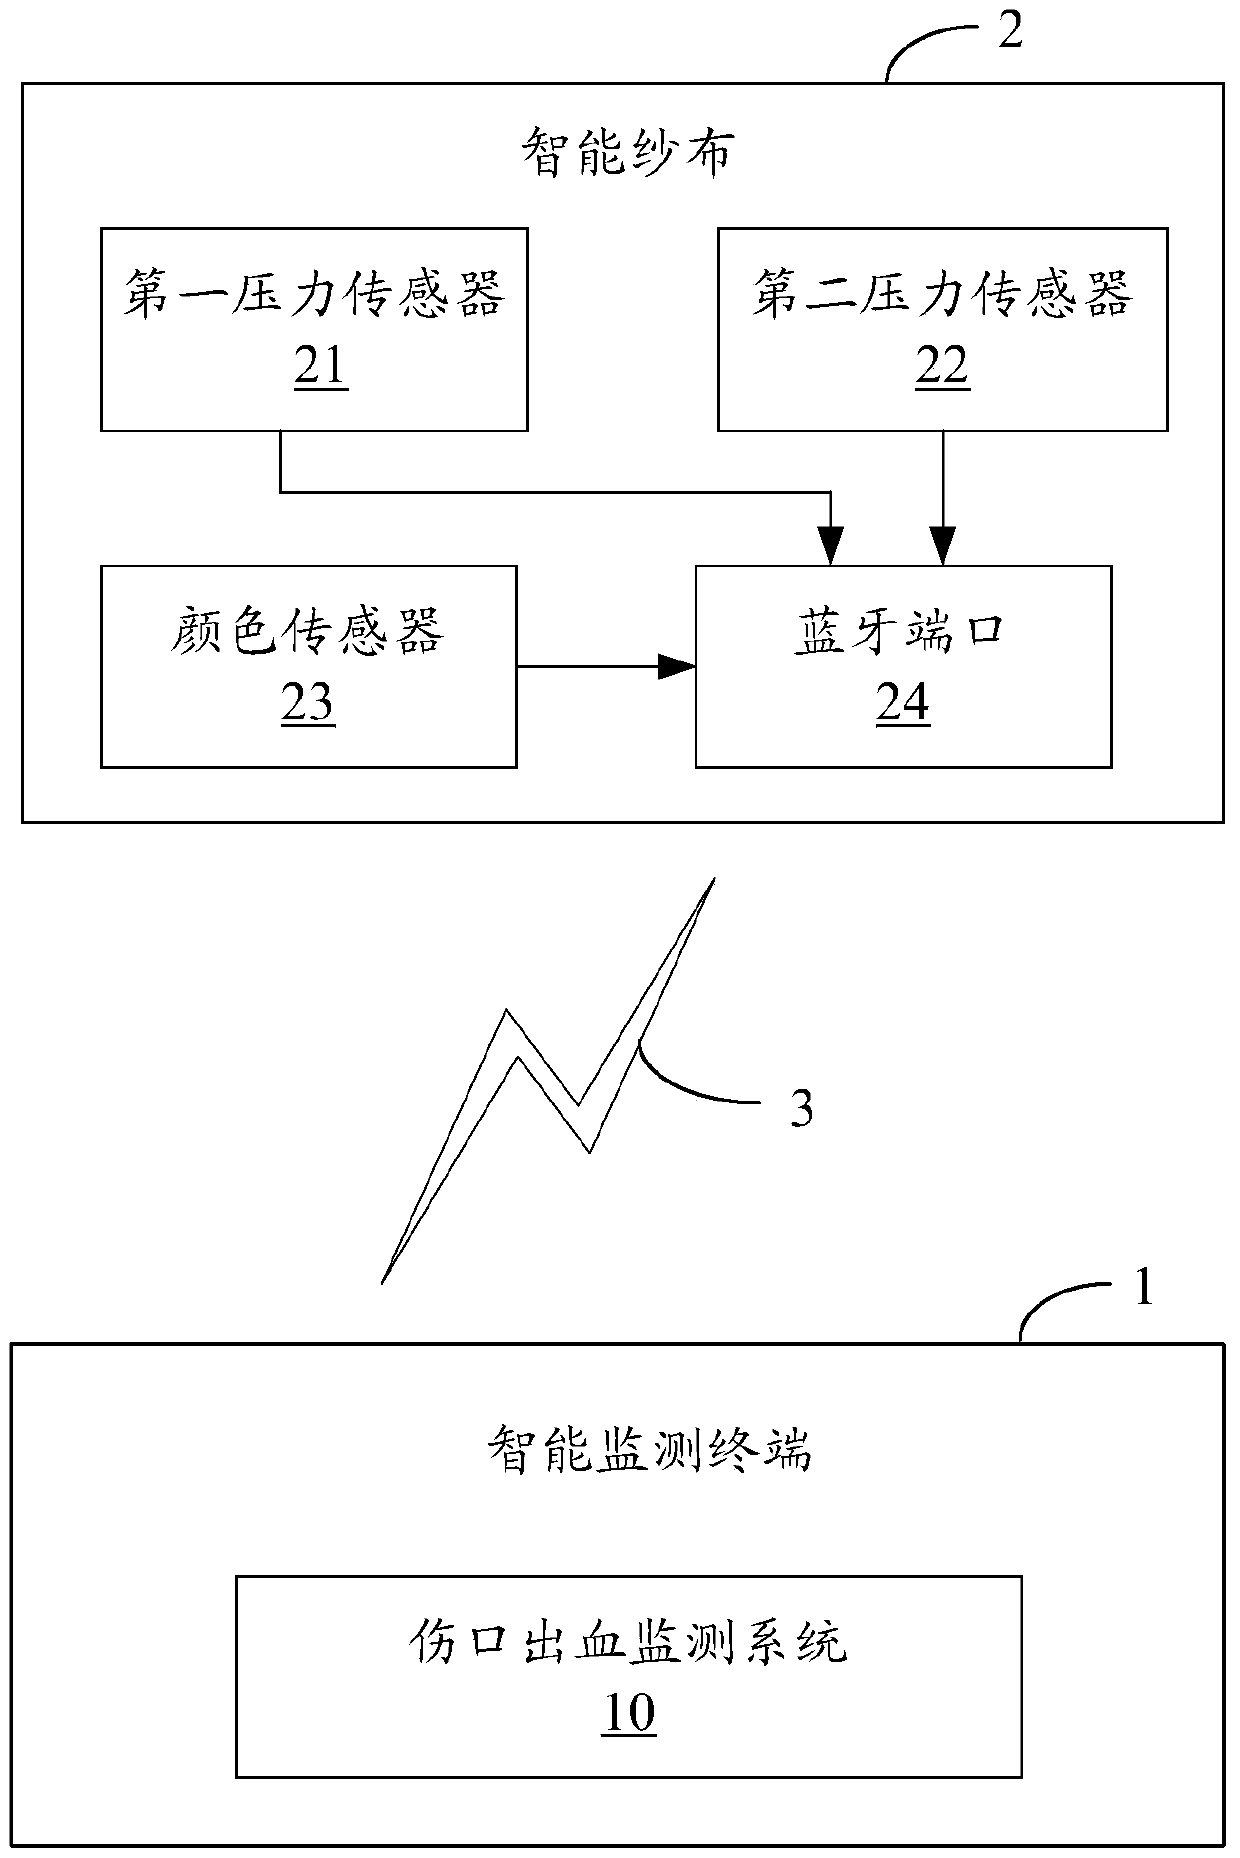 Wound bleeding monitoring system and method